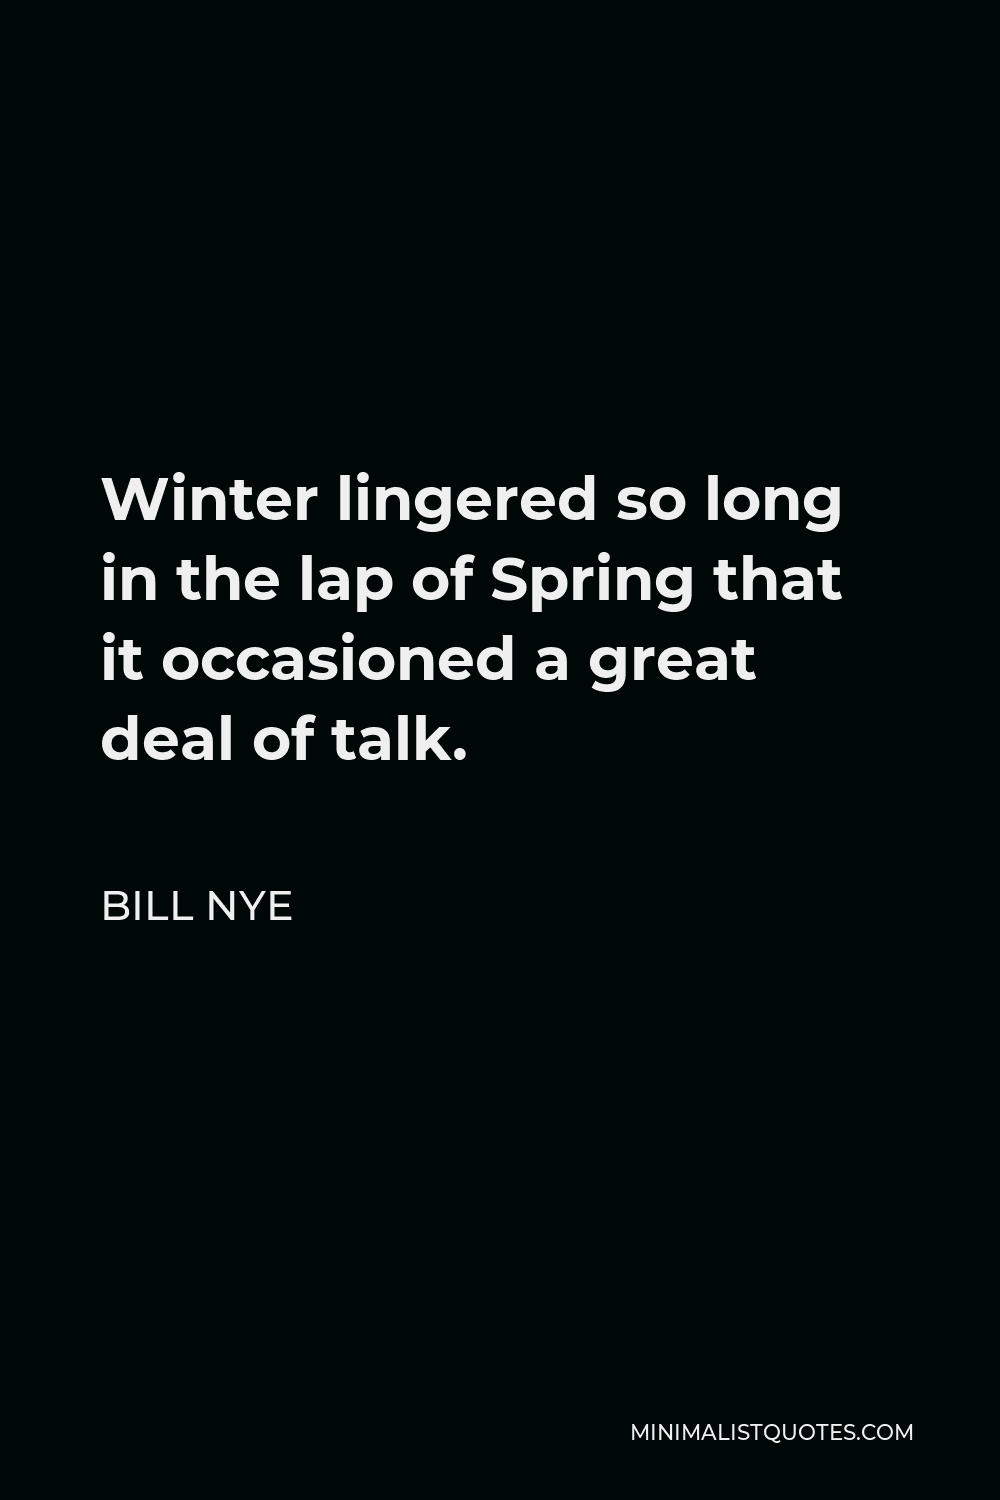 Bill Nye Quote - Winter lingered so long in the lap of Spring that it occasioned a great deal of talk.